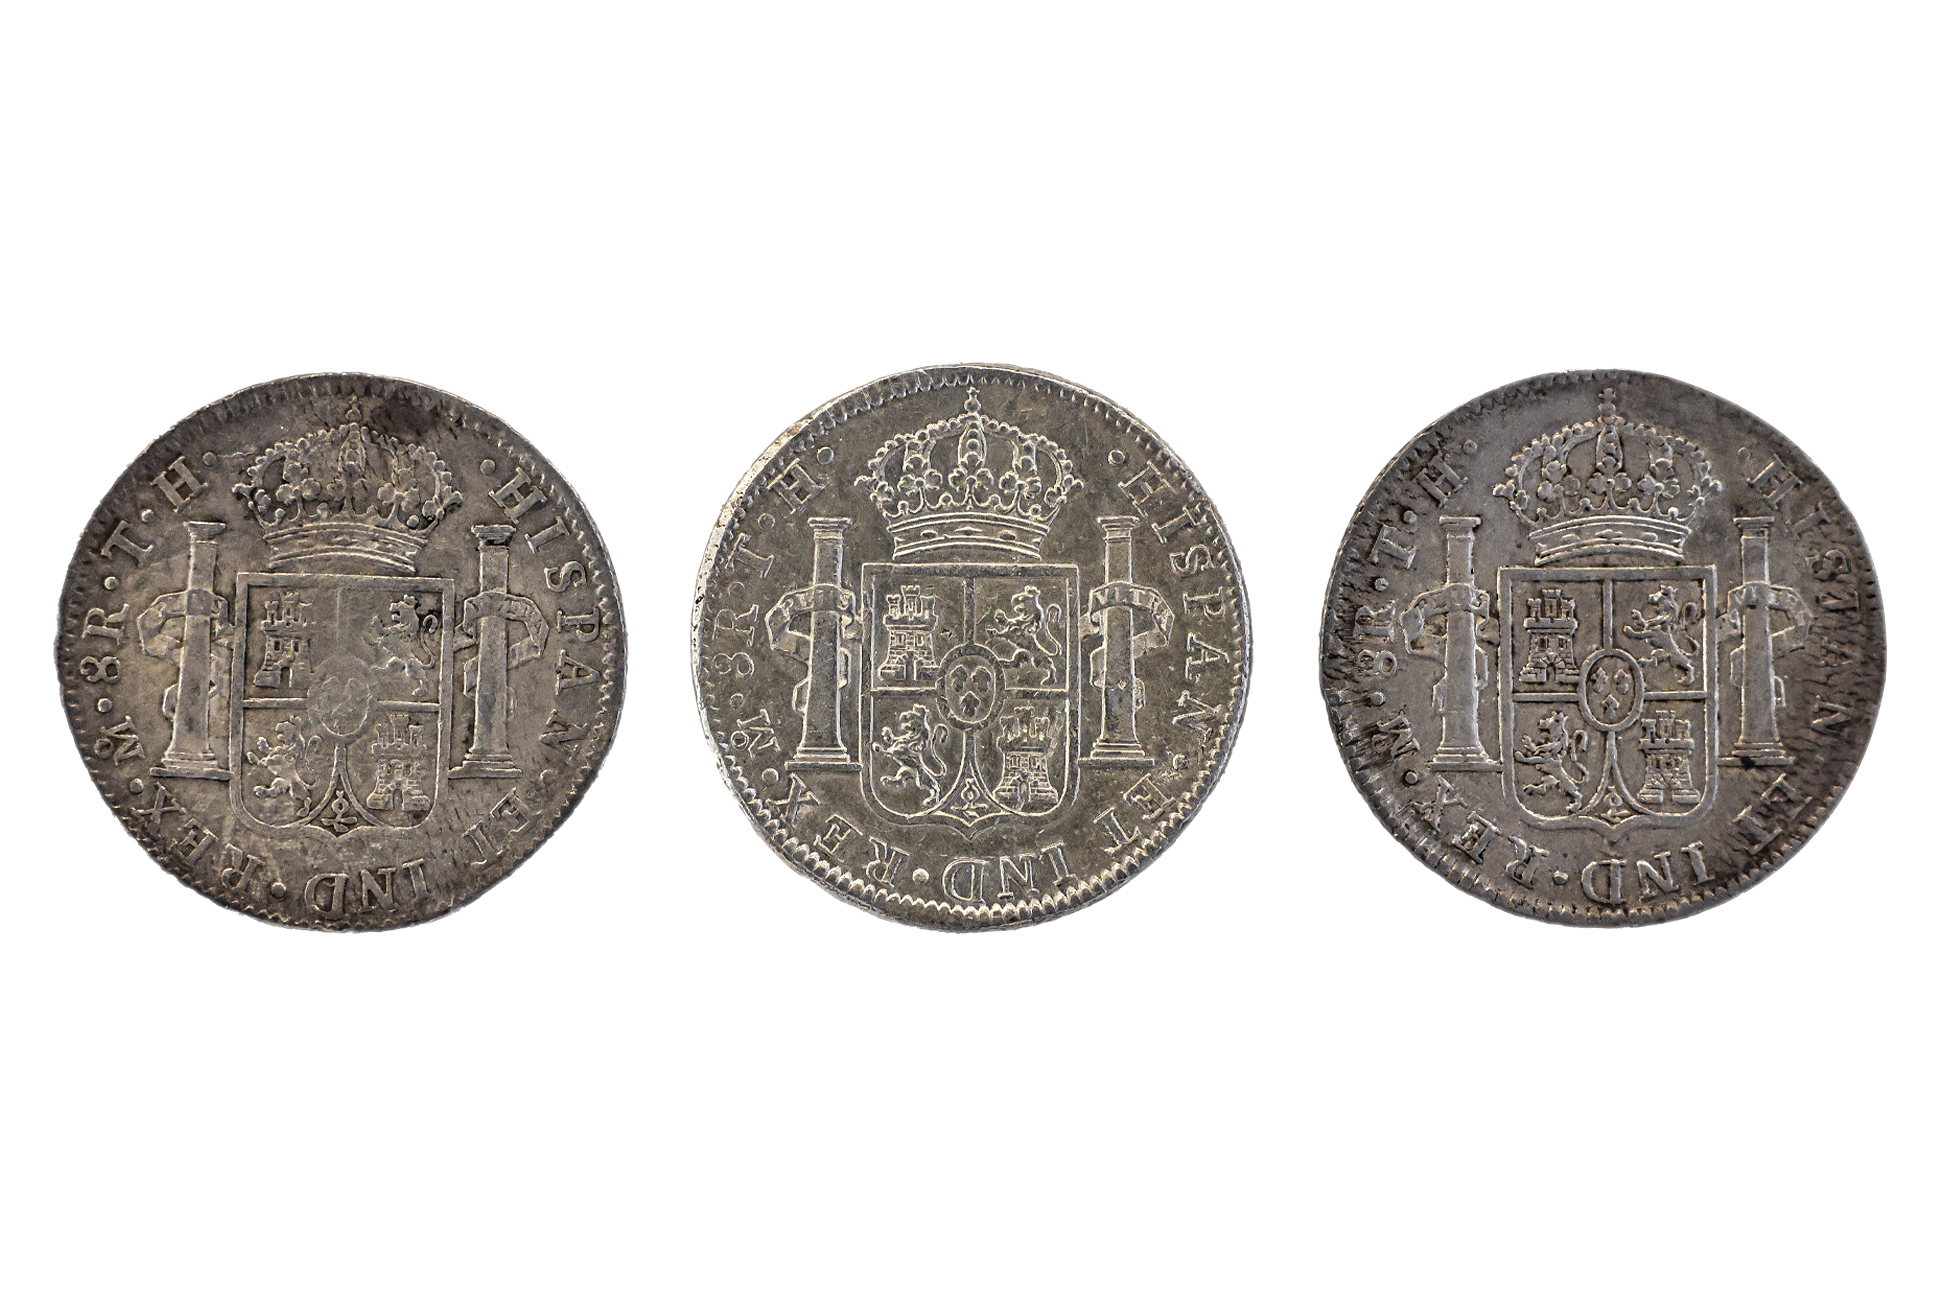 MEXICO 8 REALES 1804, 1805, 1806 (3) - Image 2 of 2